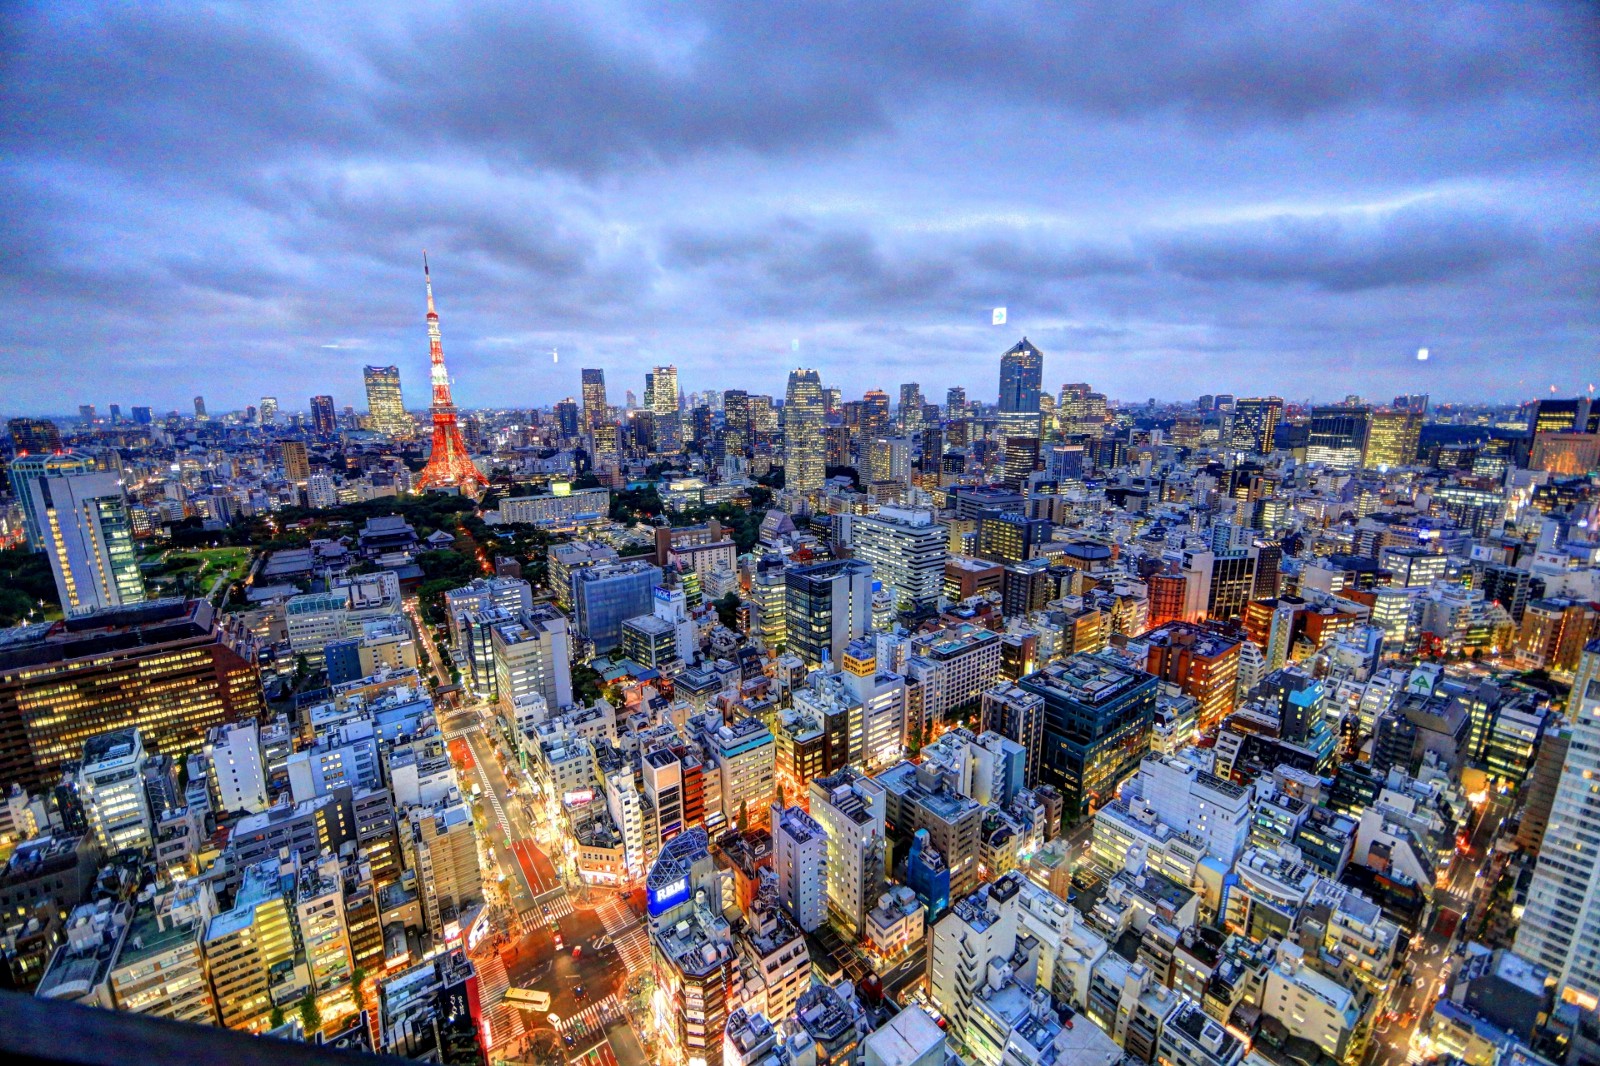 The view of Tokyo's skyline